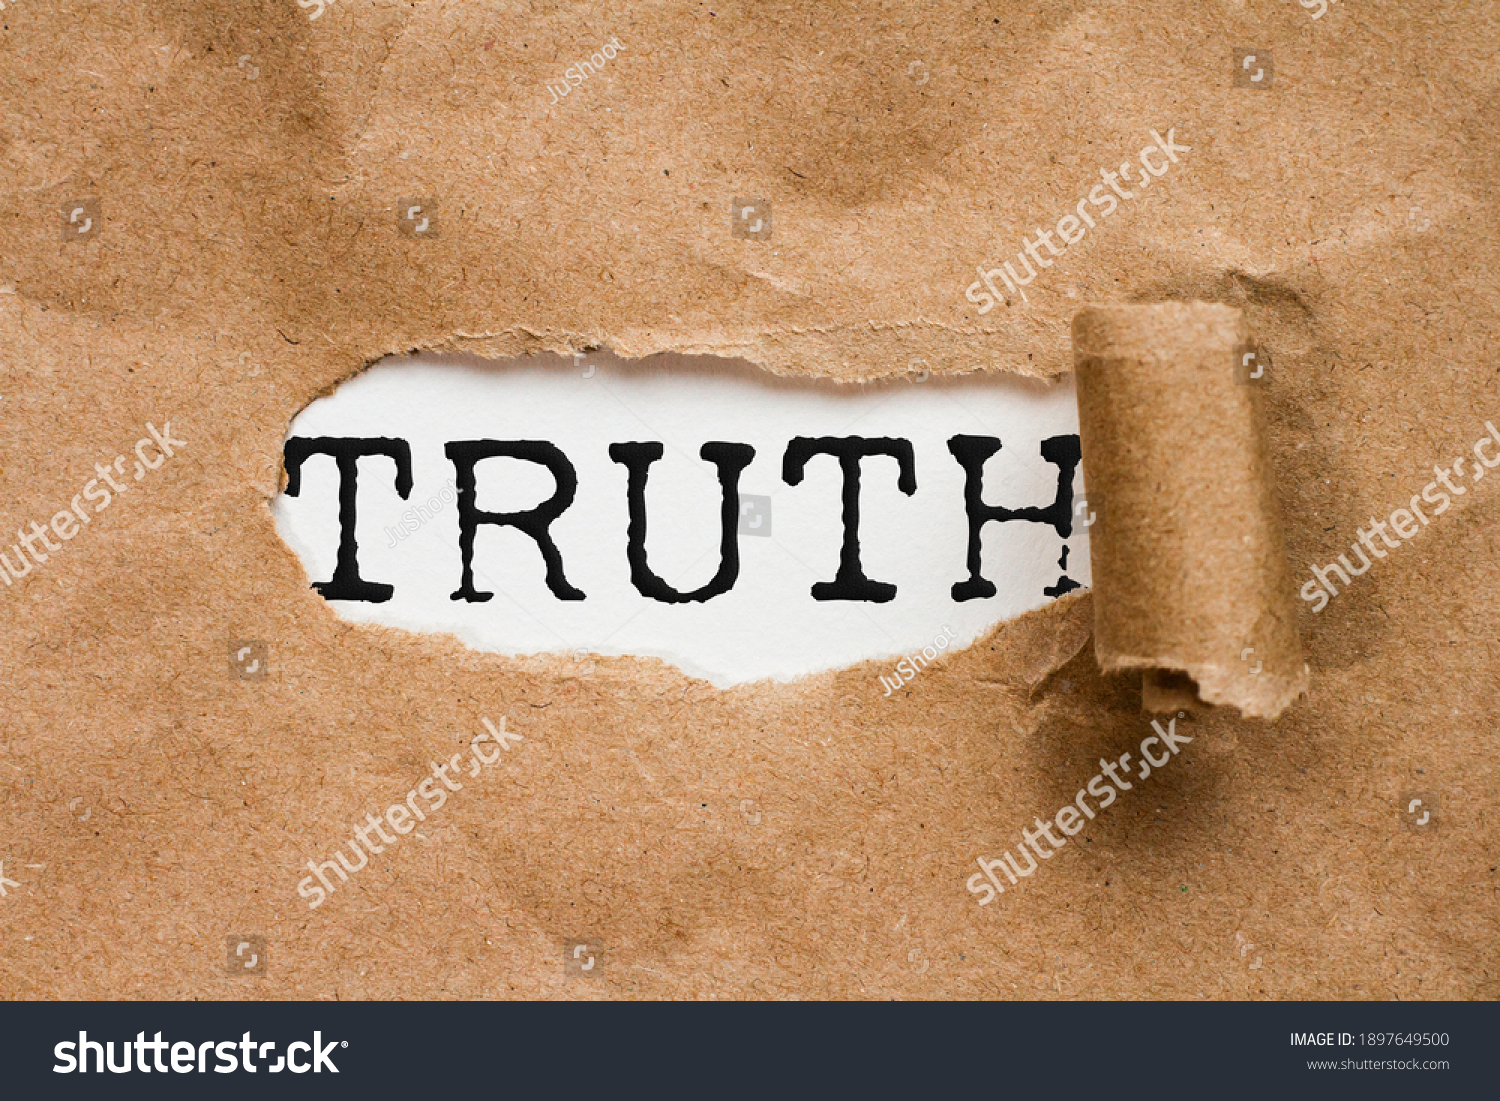 Truth. the word "truth" appears in a hole in a file. revelation of hidden facts #1897649500